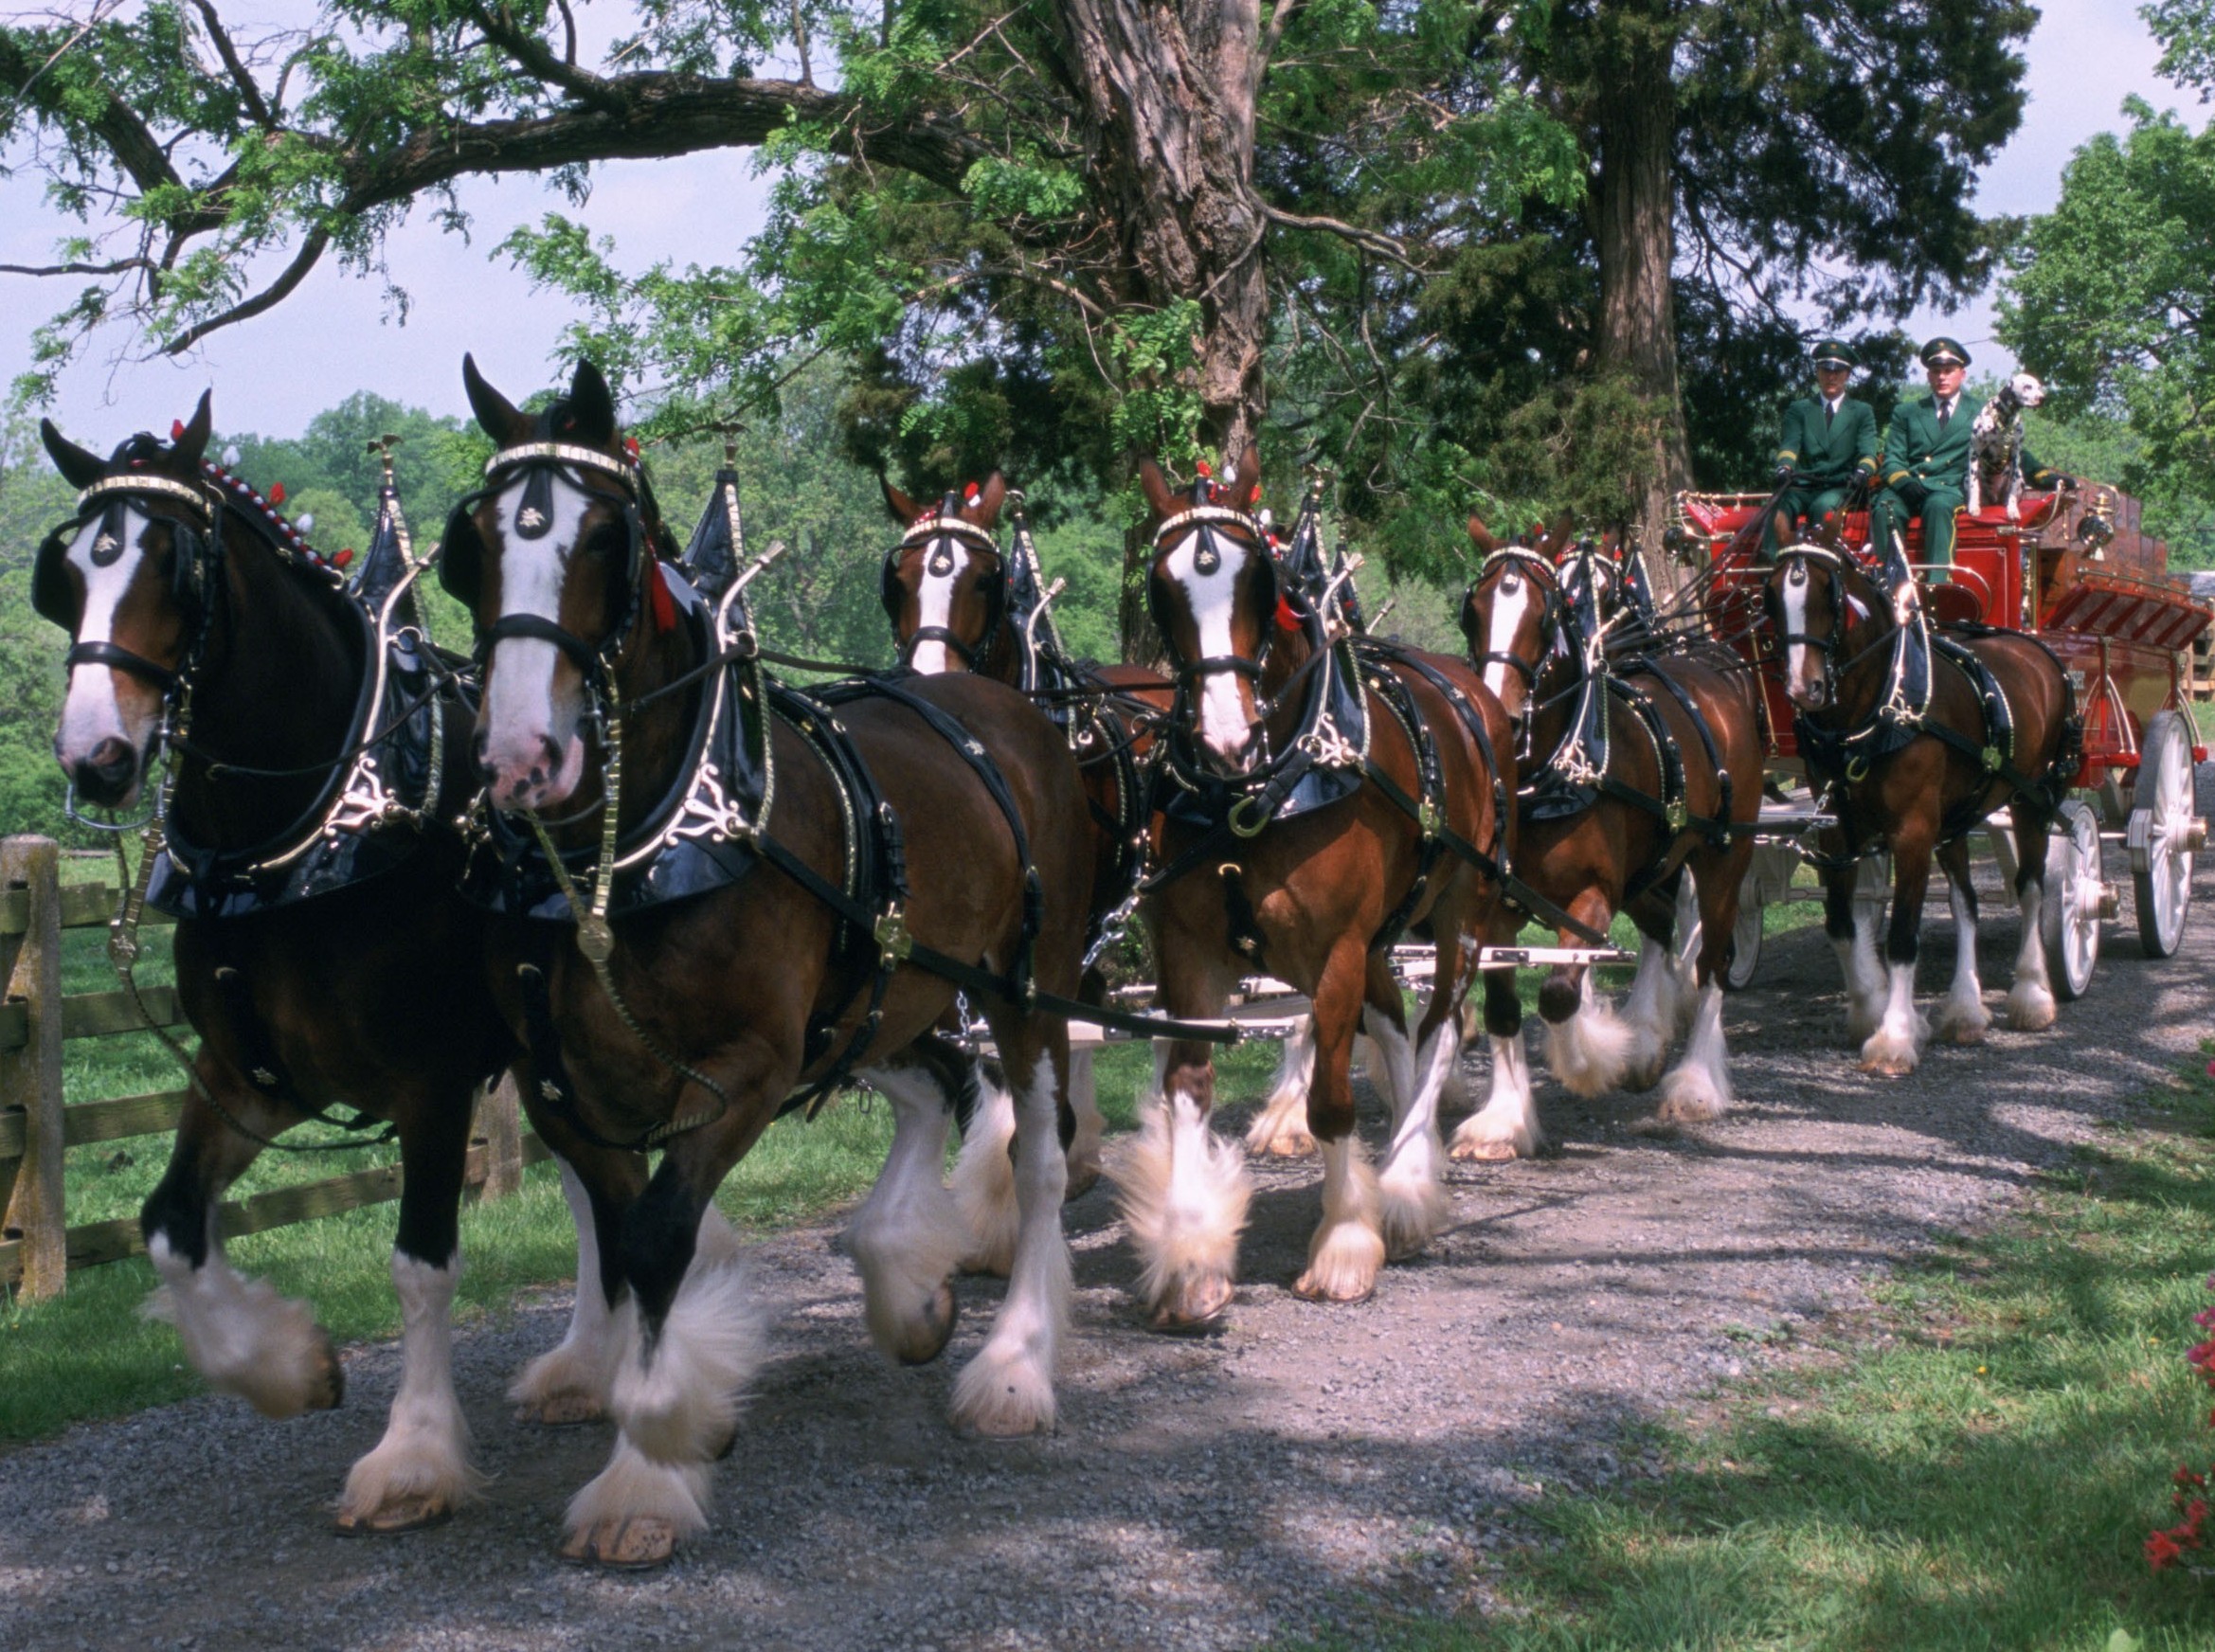 Budweiser Clydesdale Farm to Open for 2013 Season